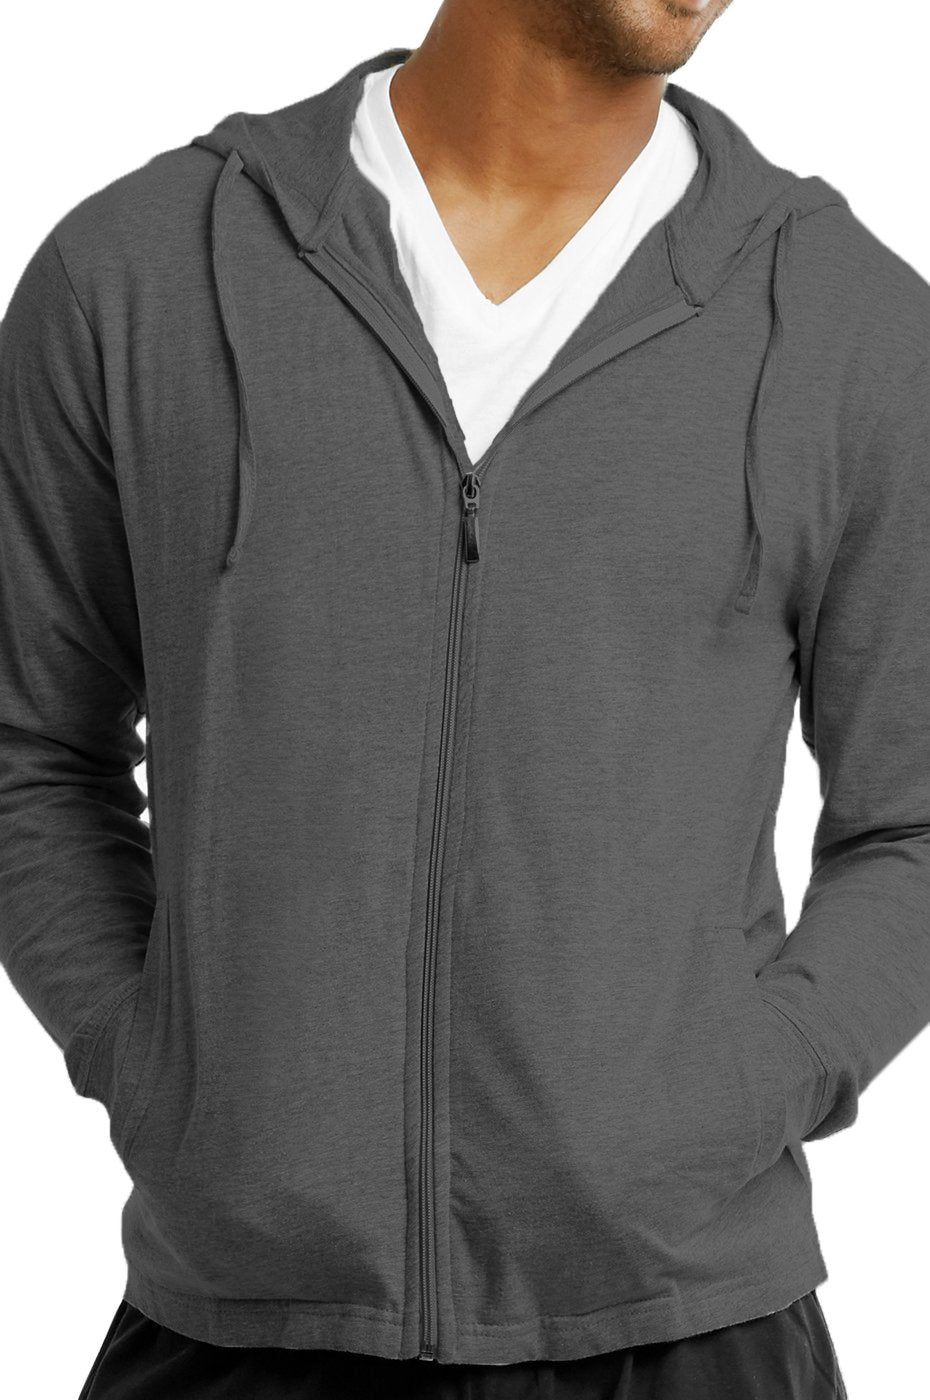 Cotton Jersey Hoodie Jacket for Men Black Small 1 Pack Mens Top